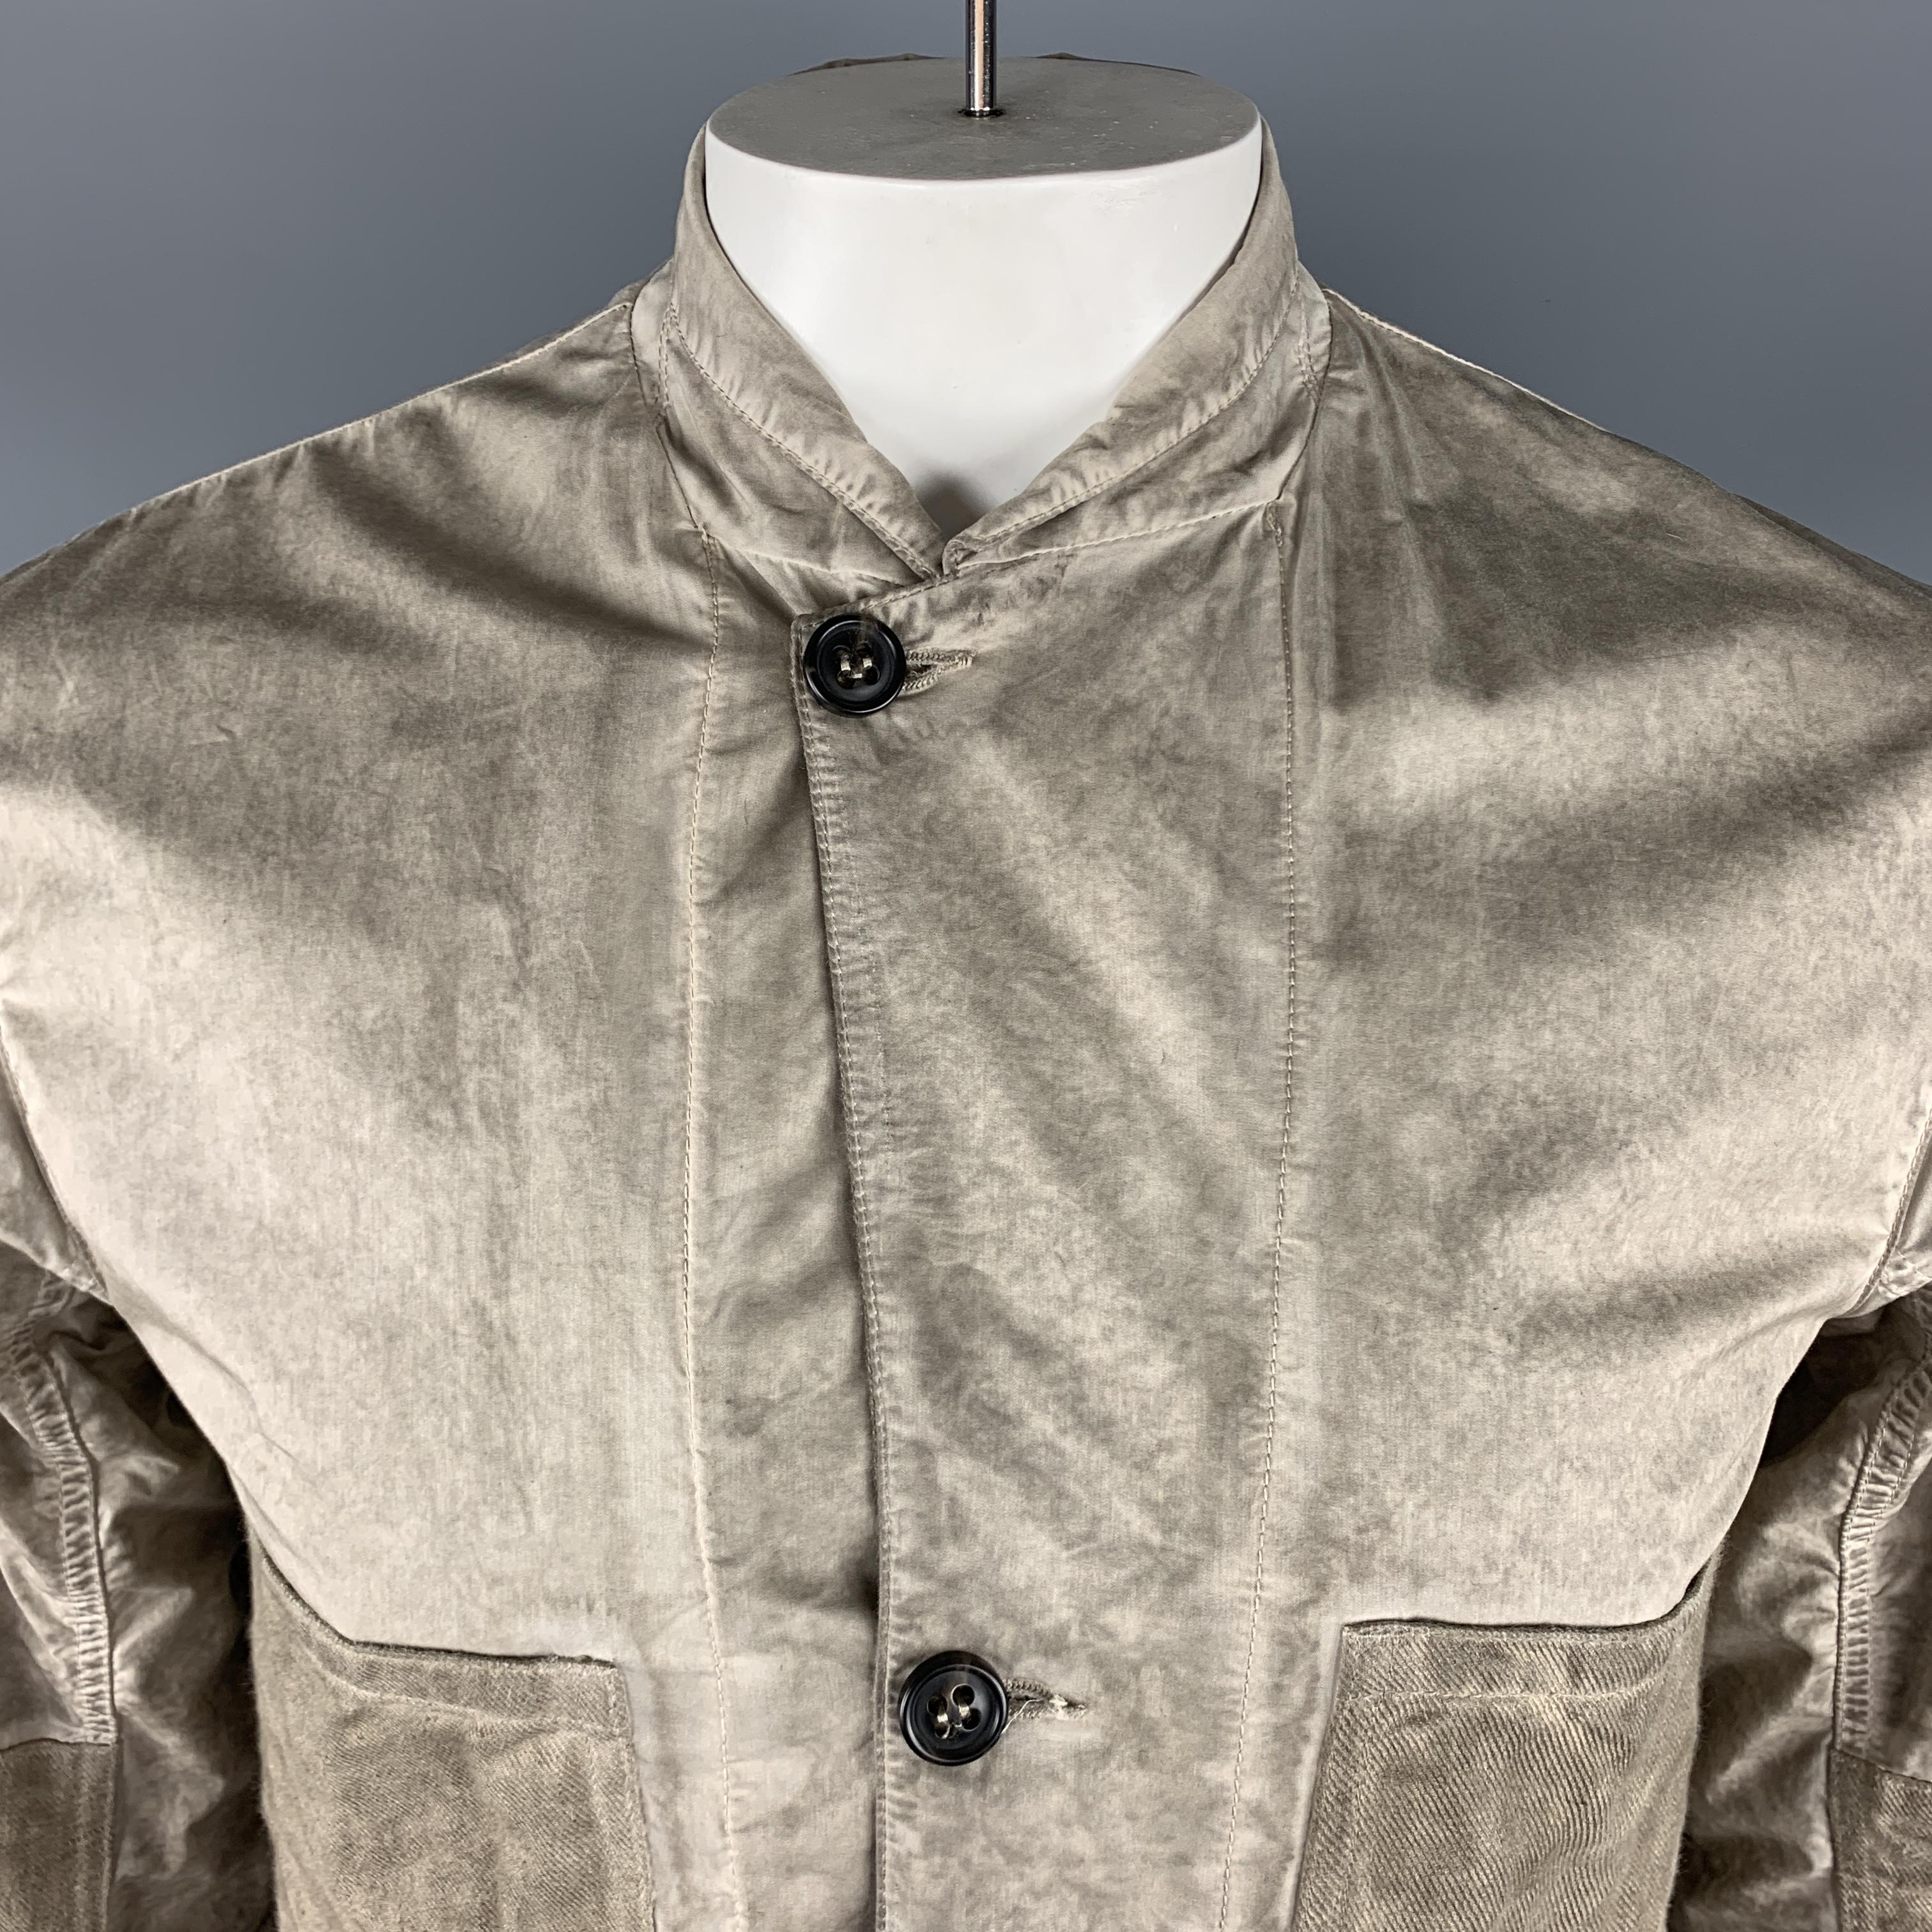 SILENT by DAMIR DOMA jacket comes in a taupe distressed cotton blend featuring a notch lapel style, two oversized canvas patch pockets, elbow patches, and a buttoned closure.
 
Very Good Pre-Owned Condition.
Marked: L
 
Measurements:
 
Shoulder: